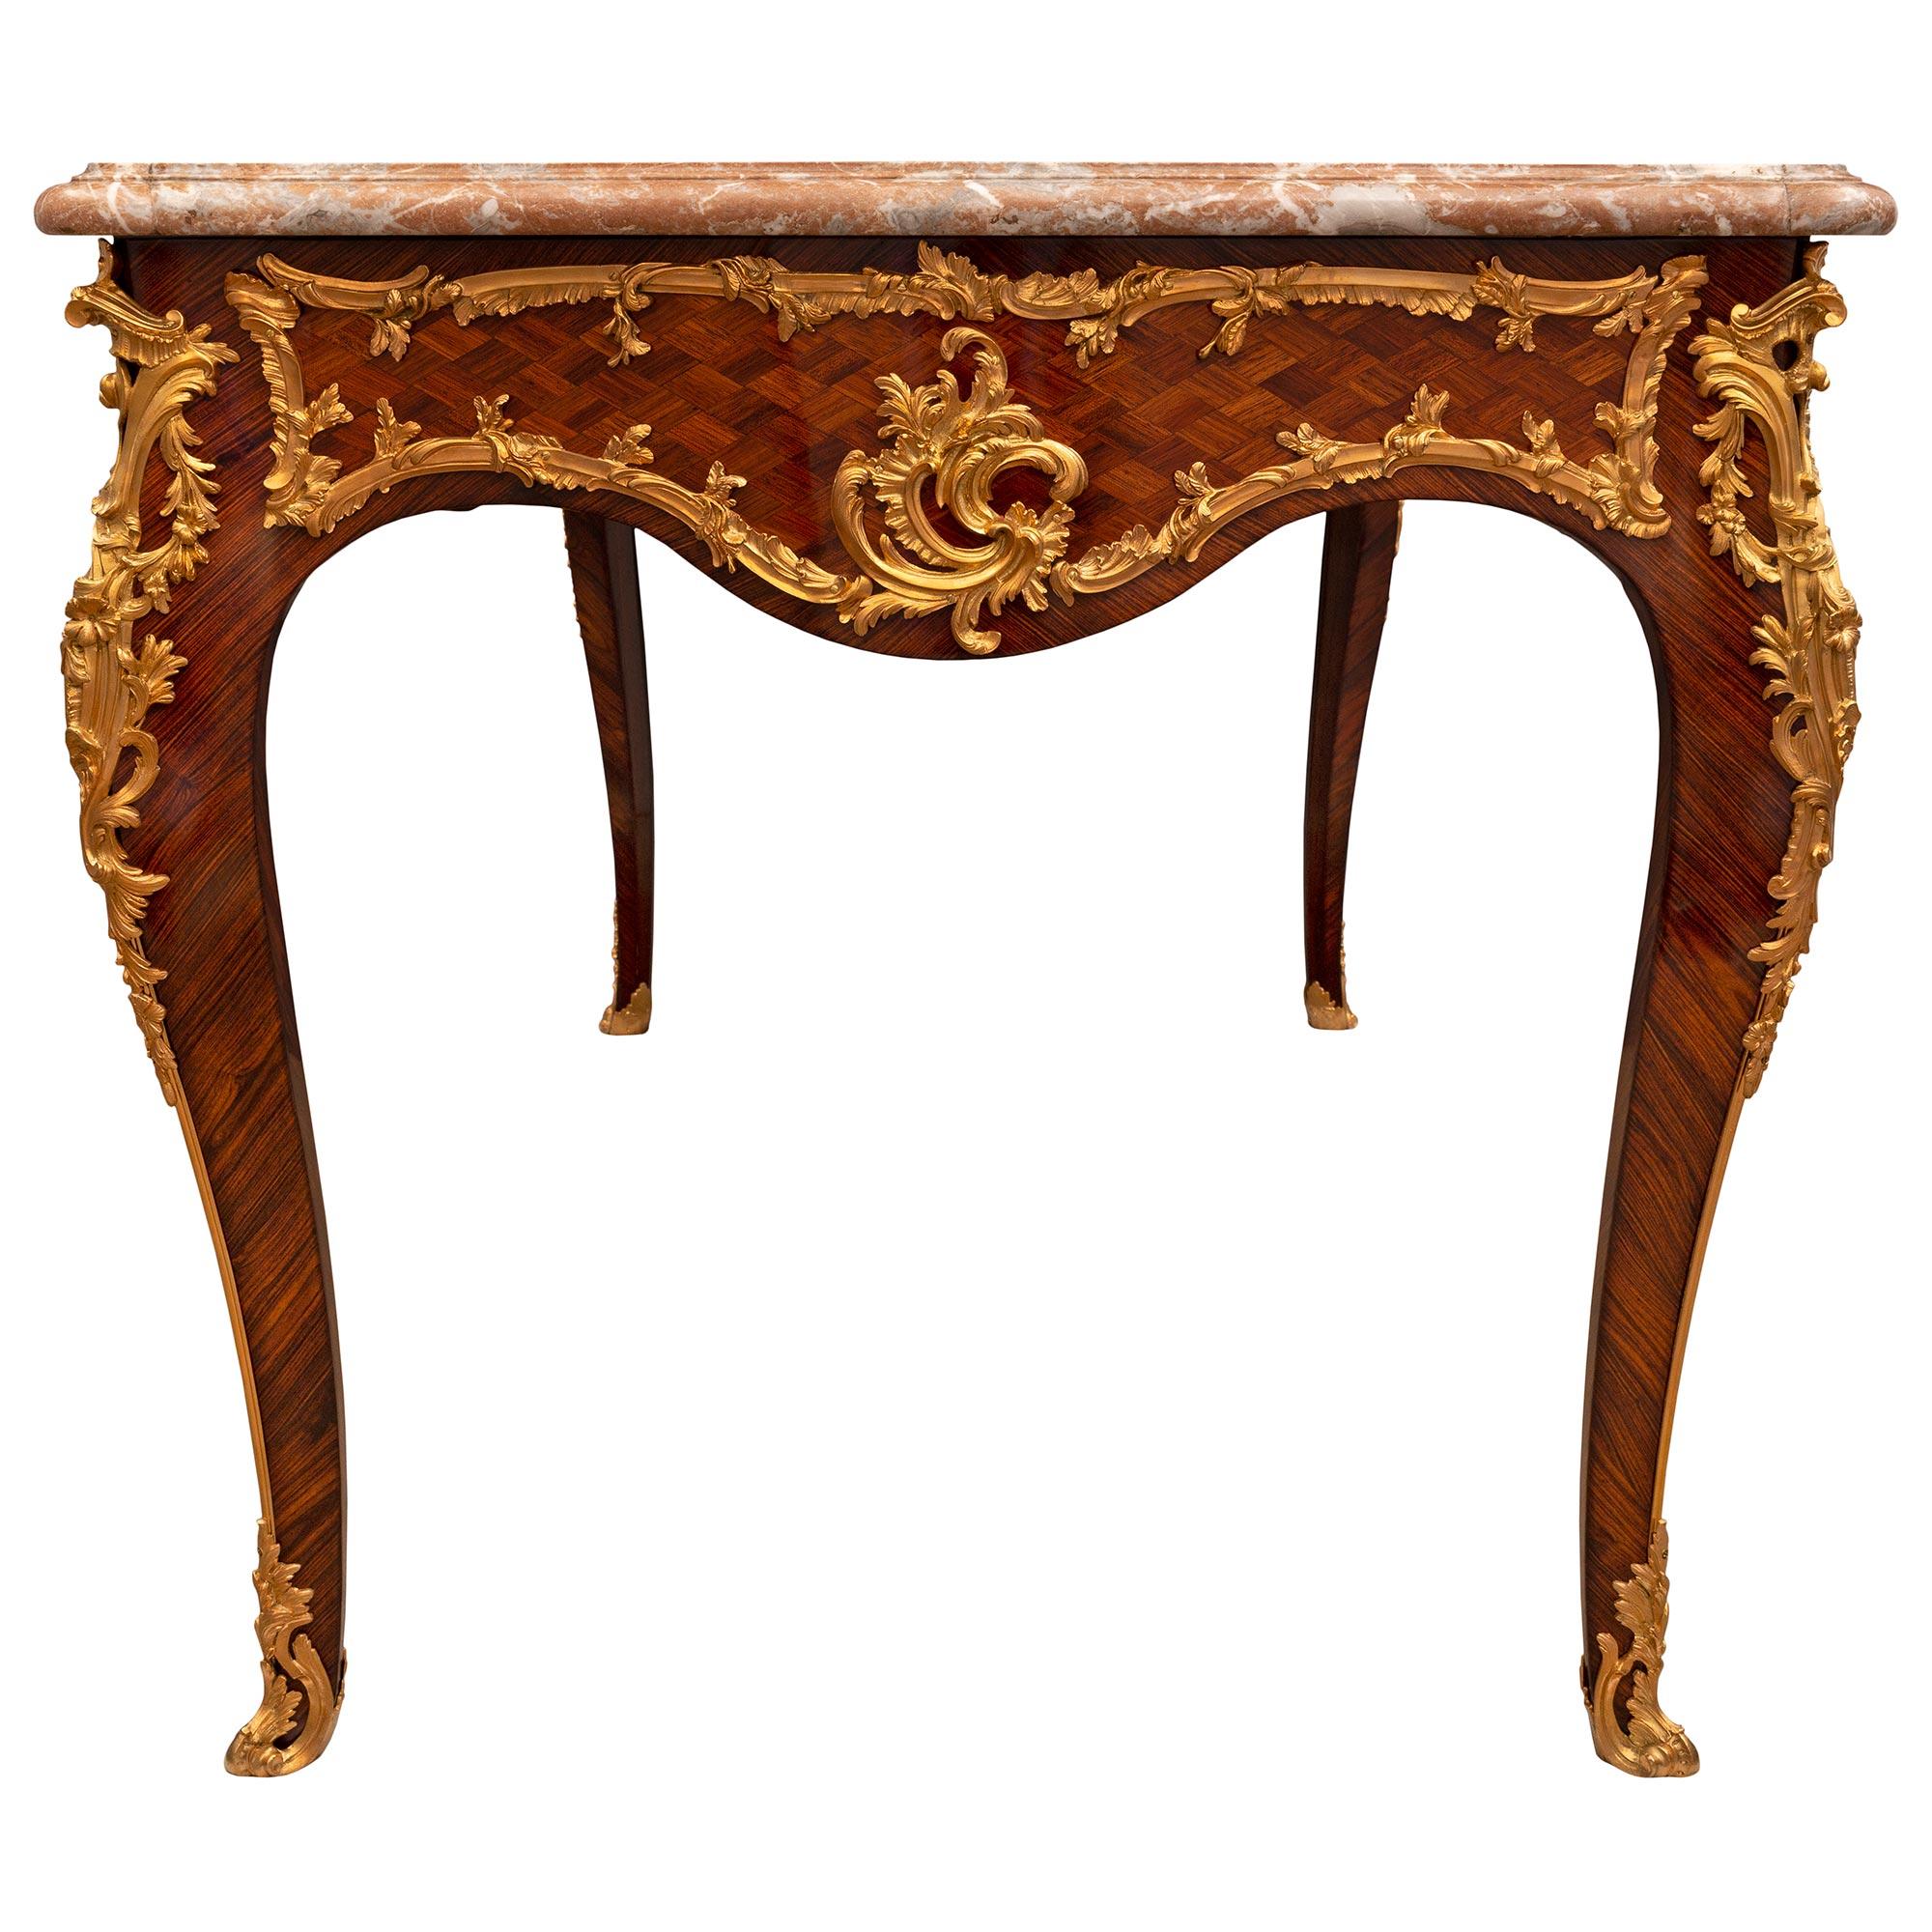 French 19th Century Louis XV Style Tulipwood and Ormolu Center Table For Sale 2